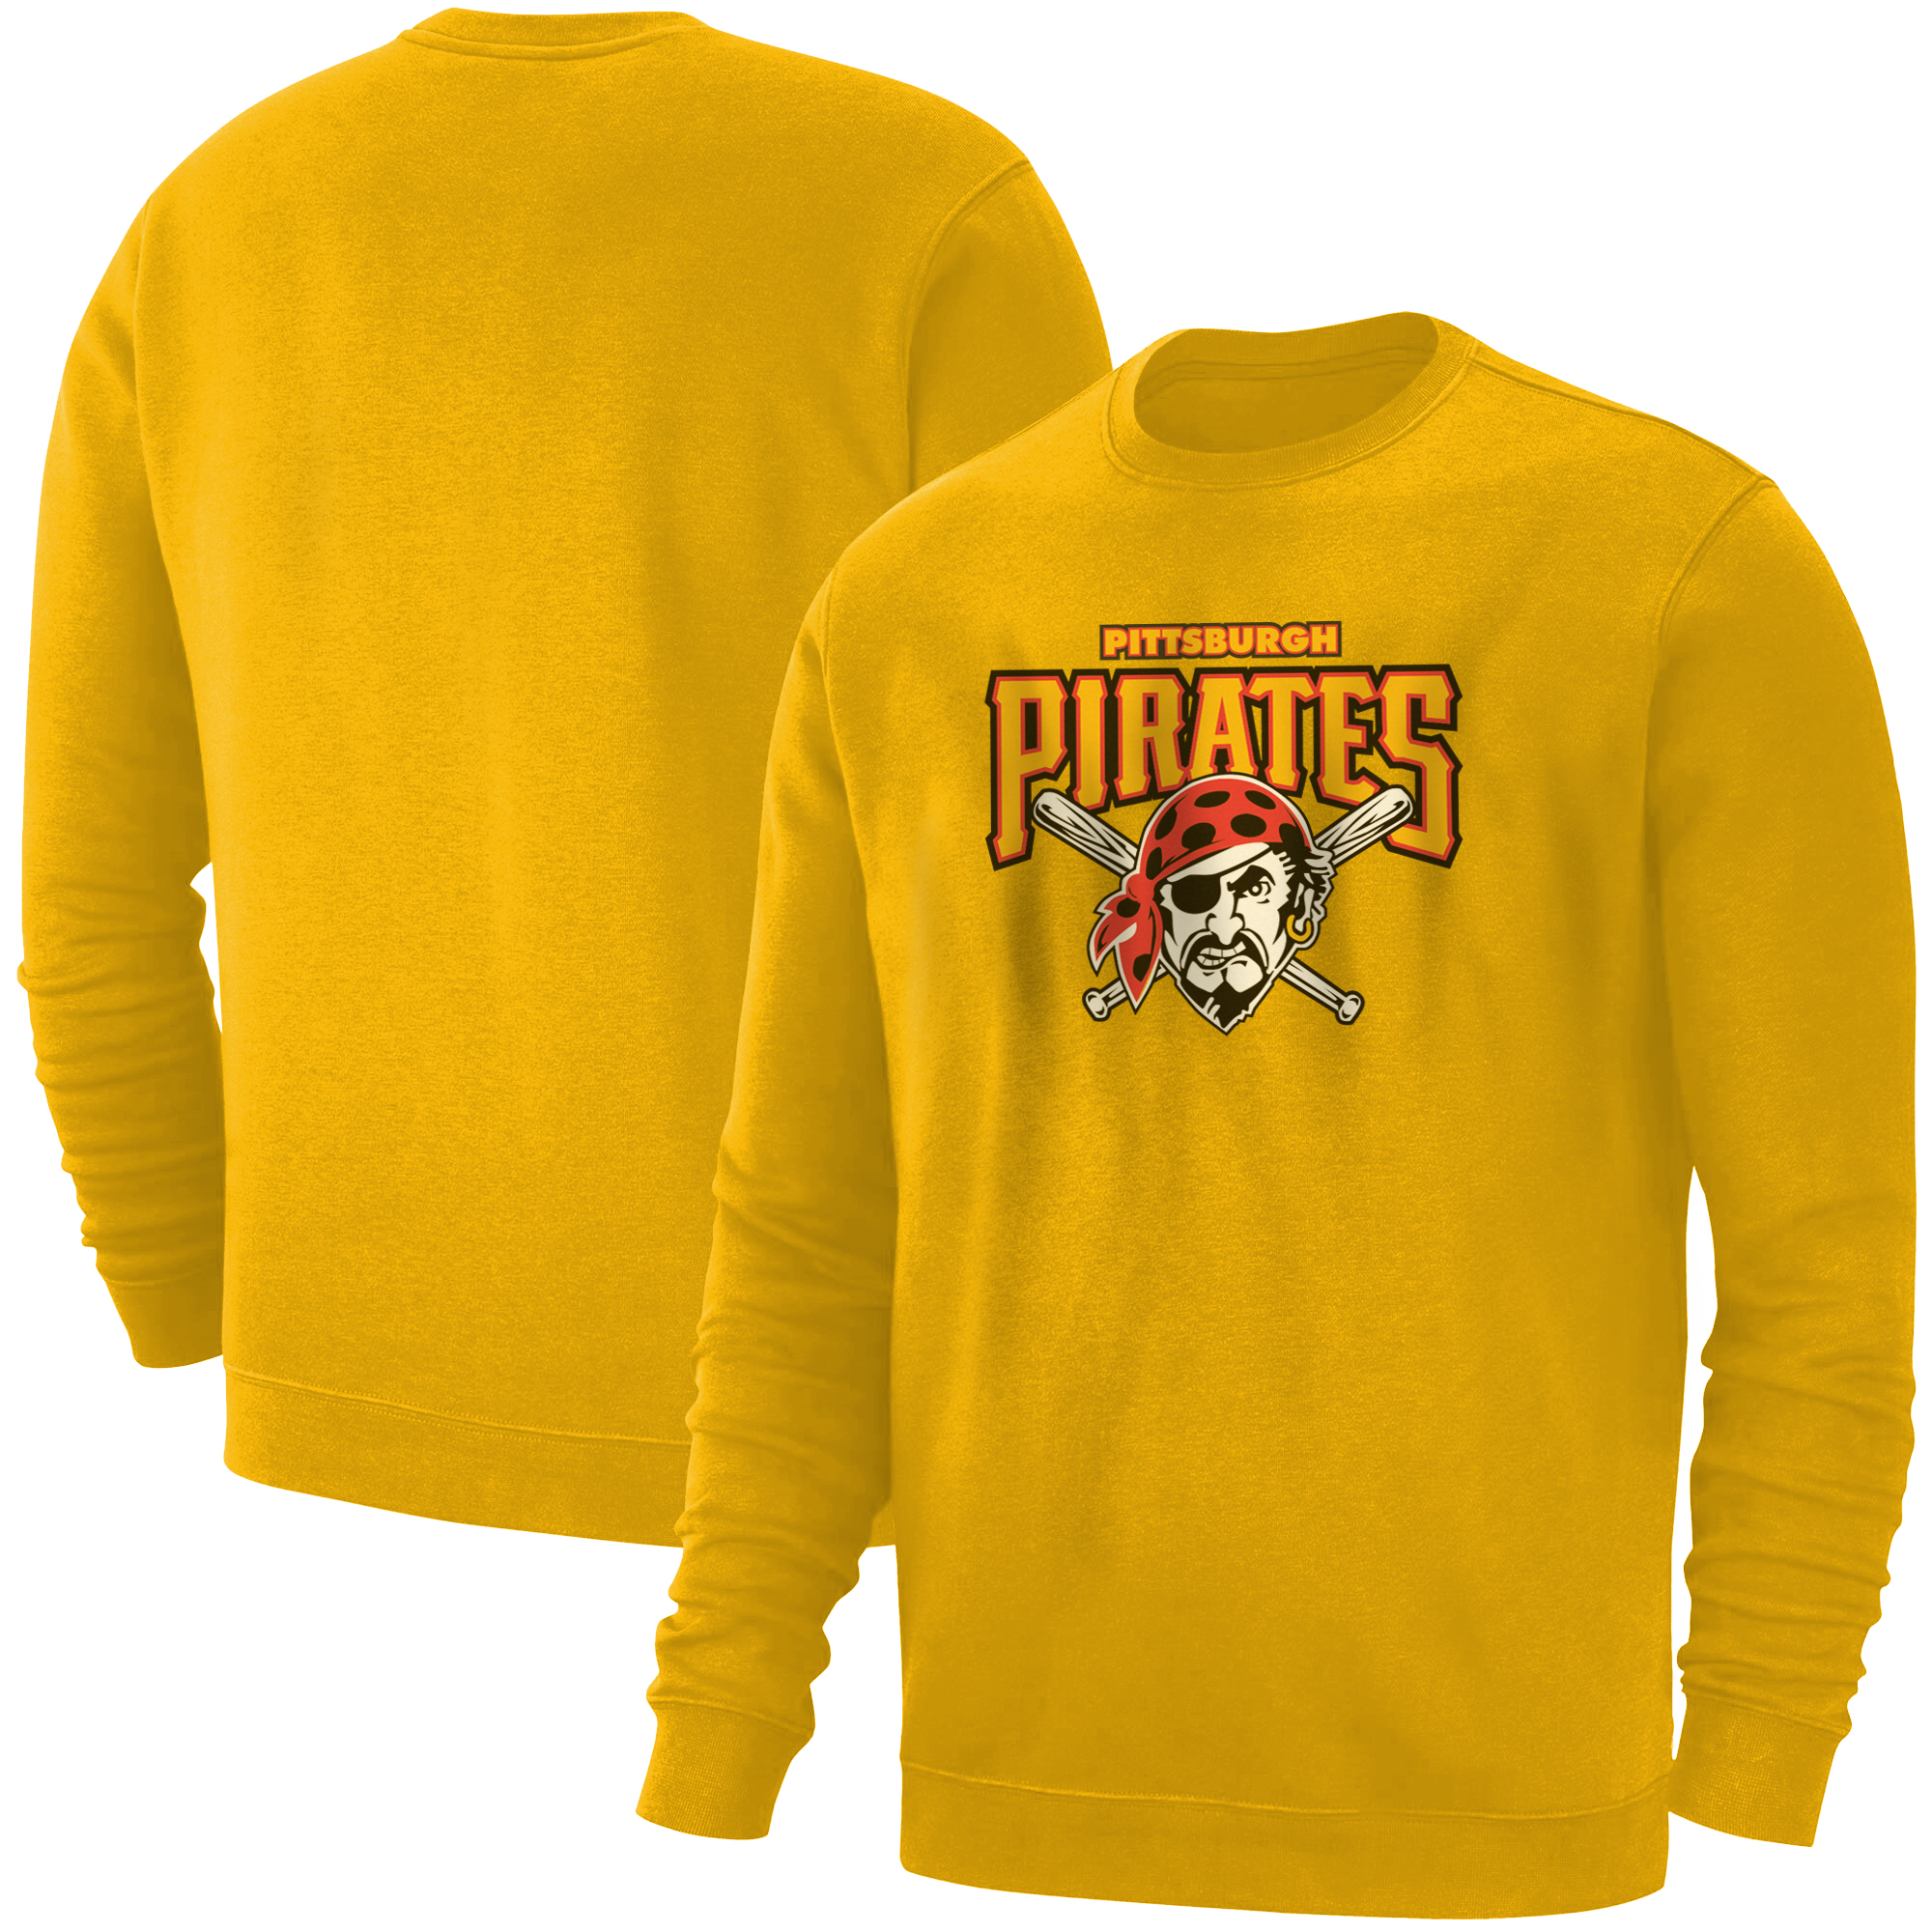 Pittsburgh Pirates Basic (BSC-YLW-6011-Pittsburgh )